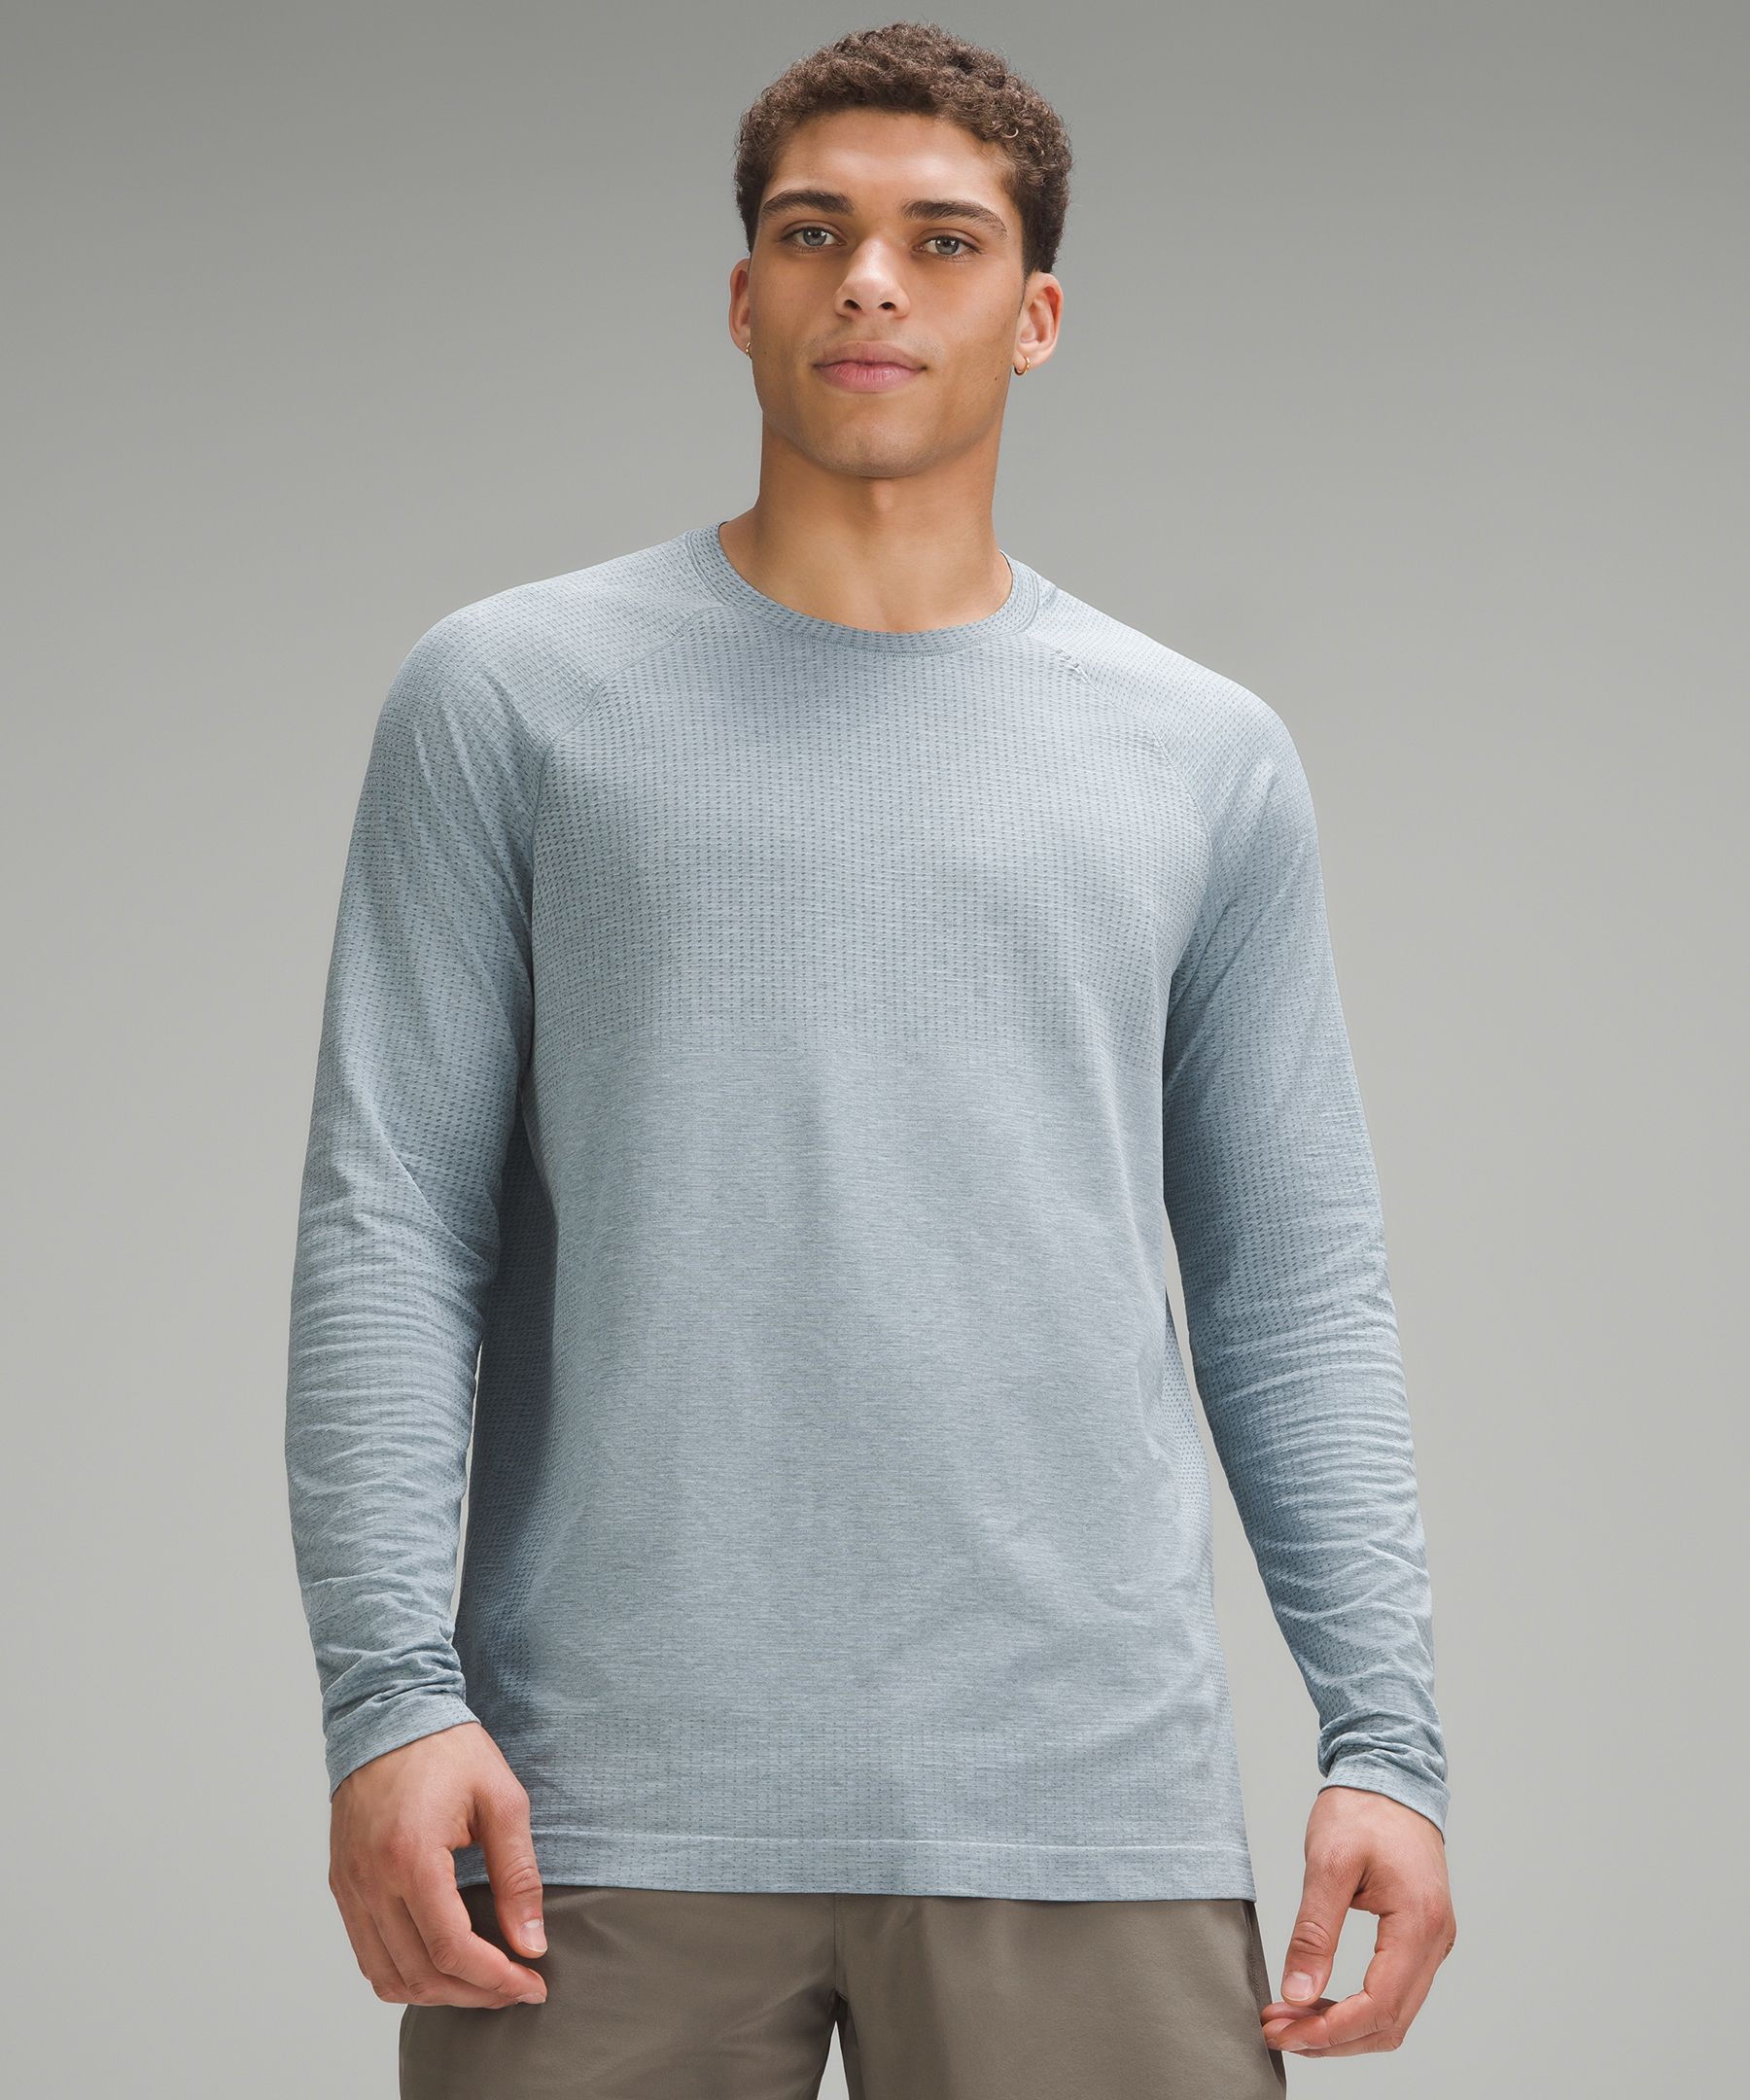 Lululemon athletica License to Train Relaxed-Fit Long-Sleeve Shirt, Men's Long  Sleeve Shirts